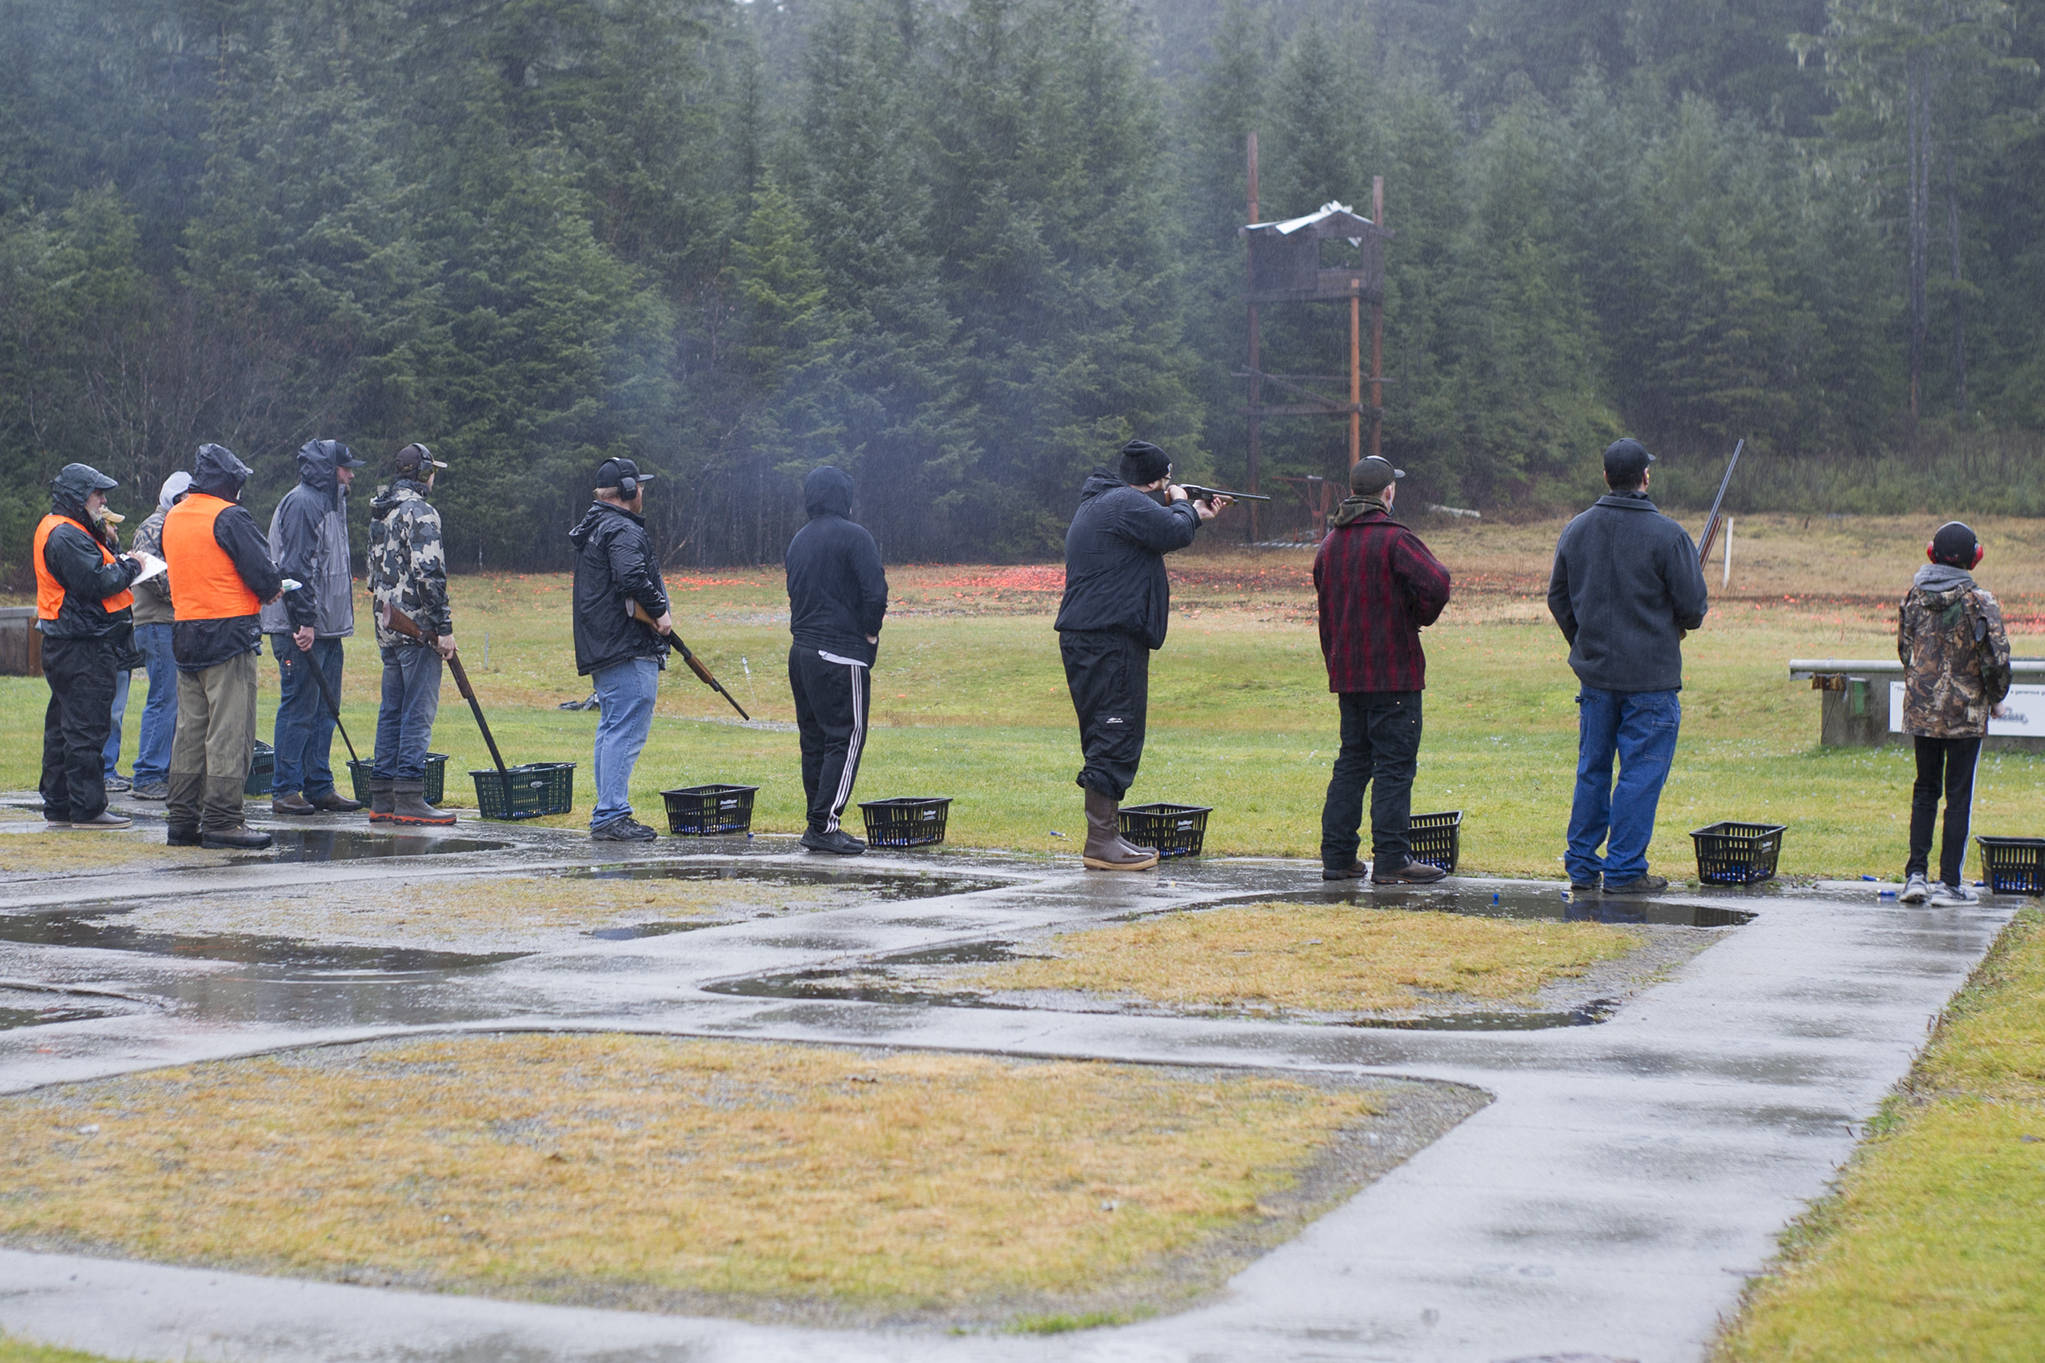 Adults and children participate in a shotgun shooting event for the Thanksgiving Turkey Shoot at the Juneau Gun Club on Saturday. The event was put on by the Juneau Gun Club, Juneau Shooting Sports Foundation, Juneau Archery Club and ADFG, and awarded 90 turkeys. (Nolin Ainsworth | Juneau Empire)